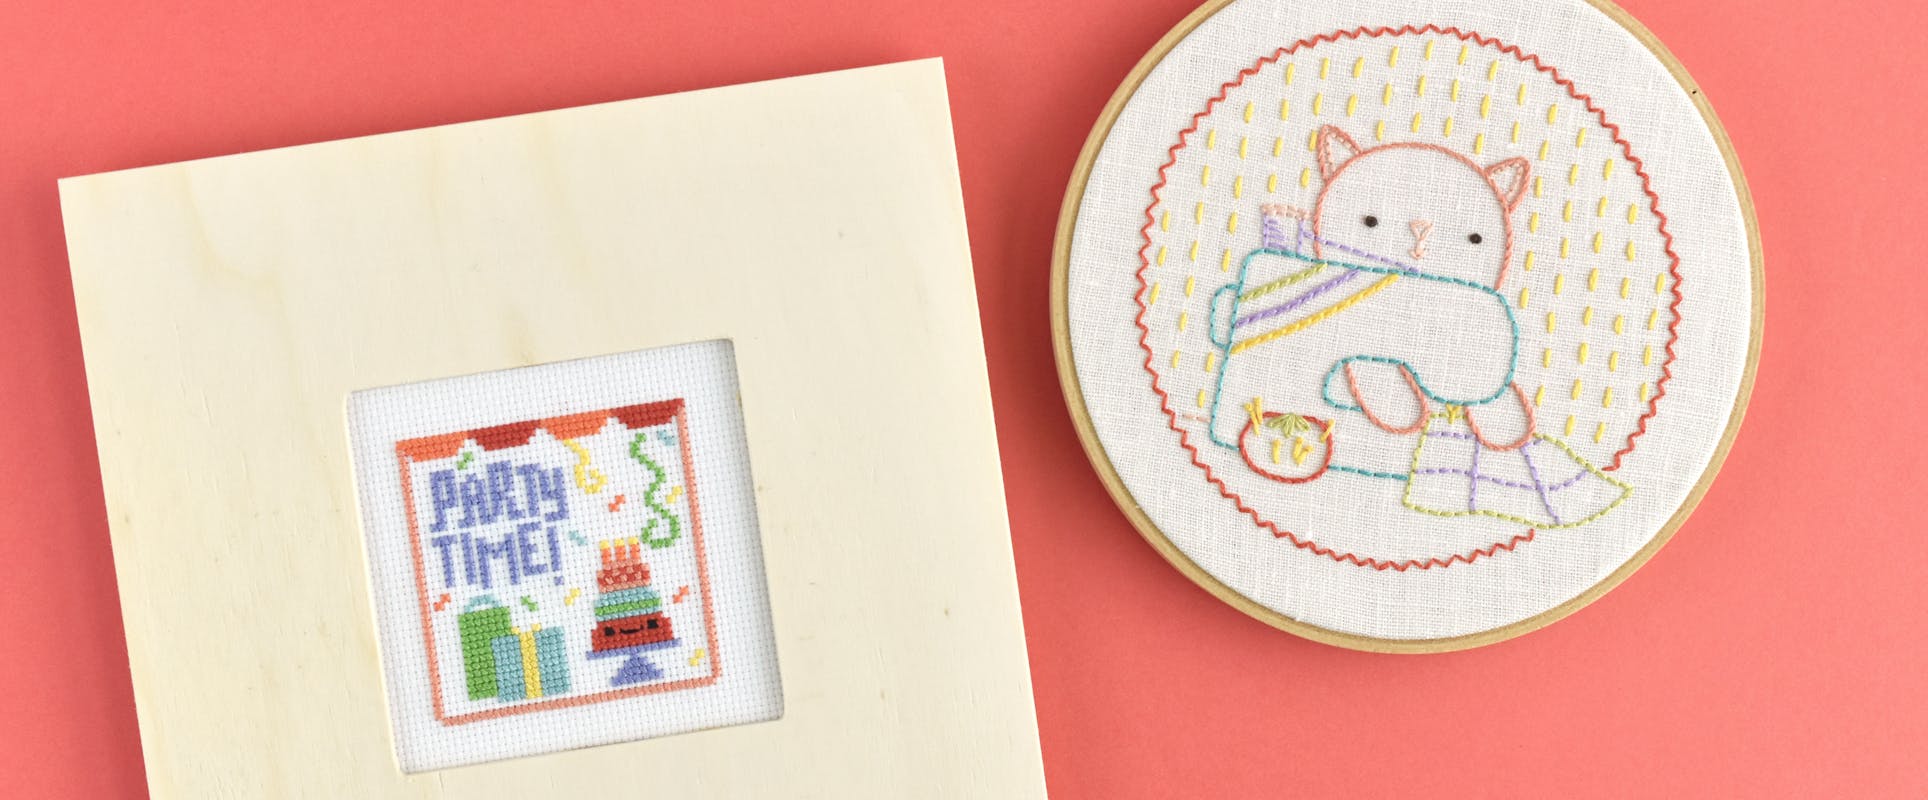 FREE Tutorial - How To Frame Cross Stitch in a Hoop